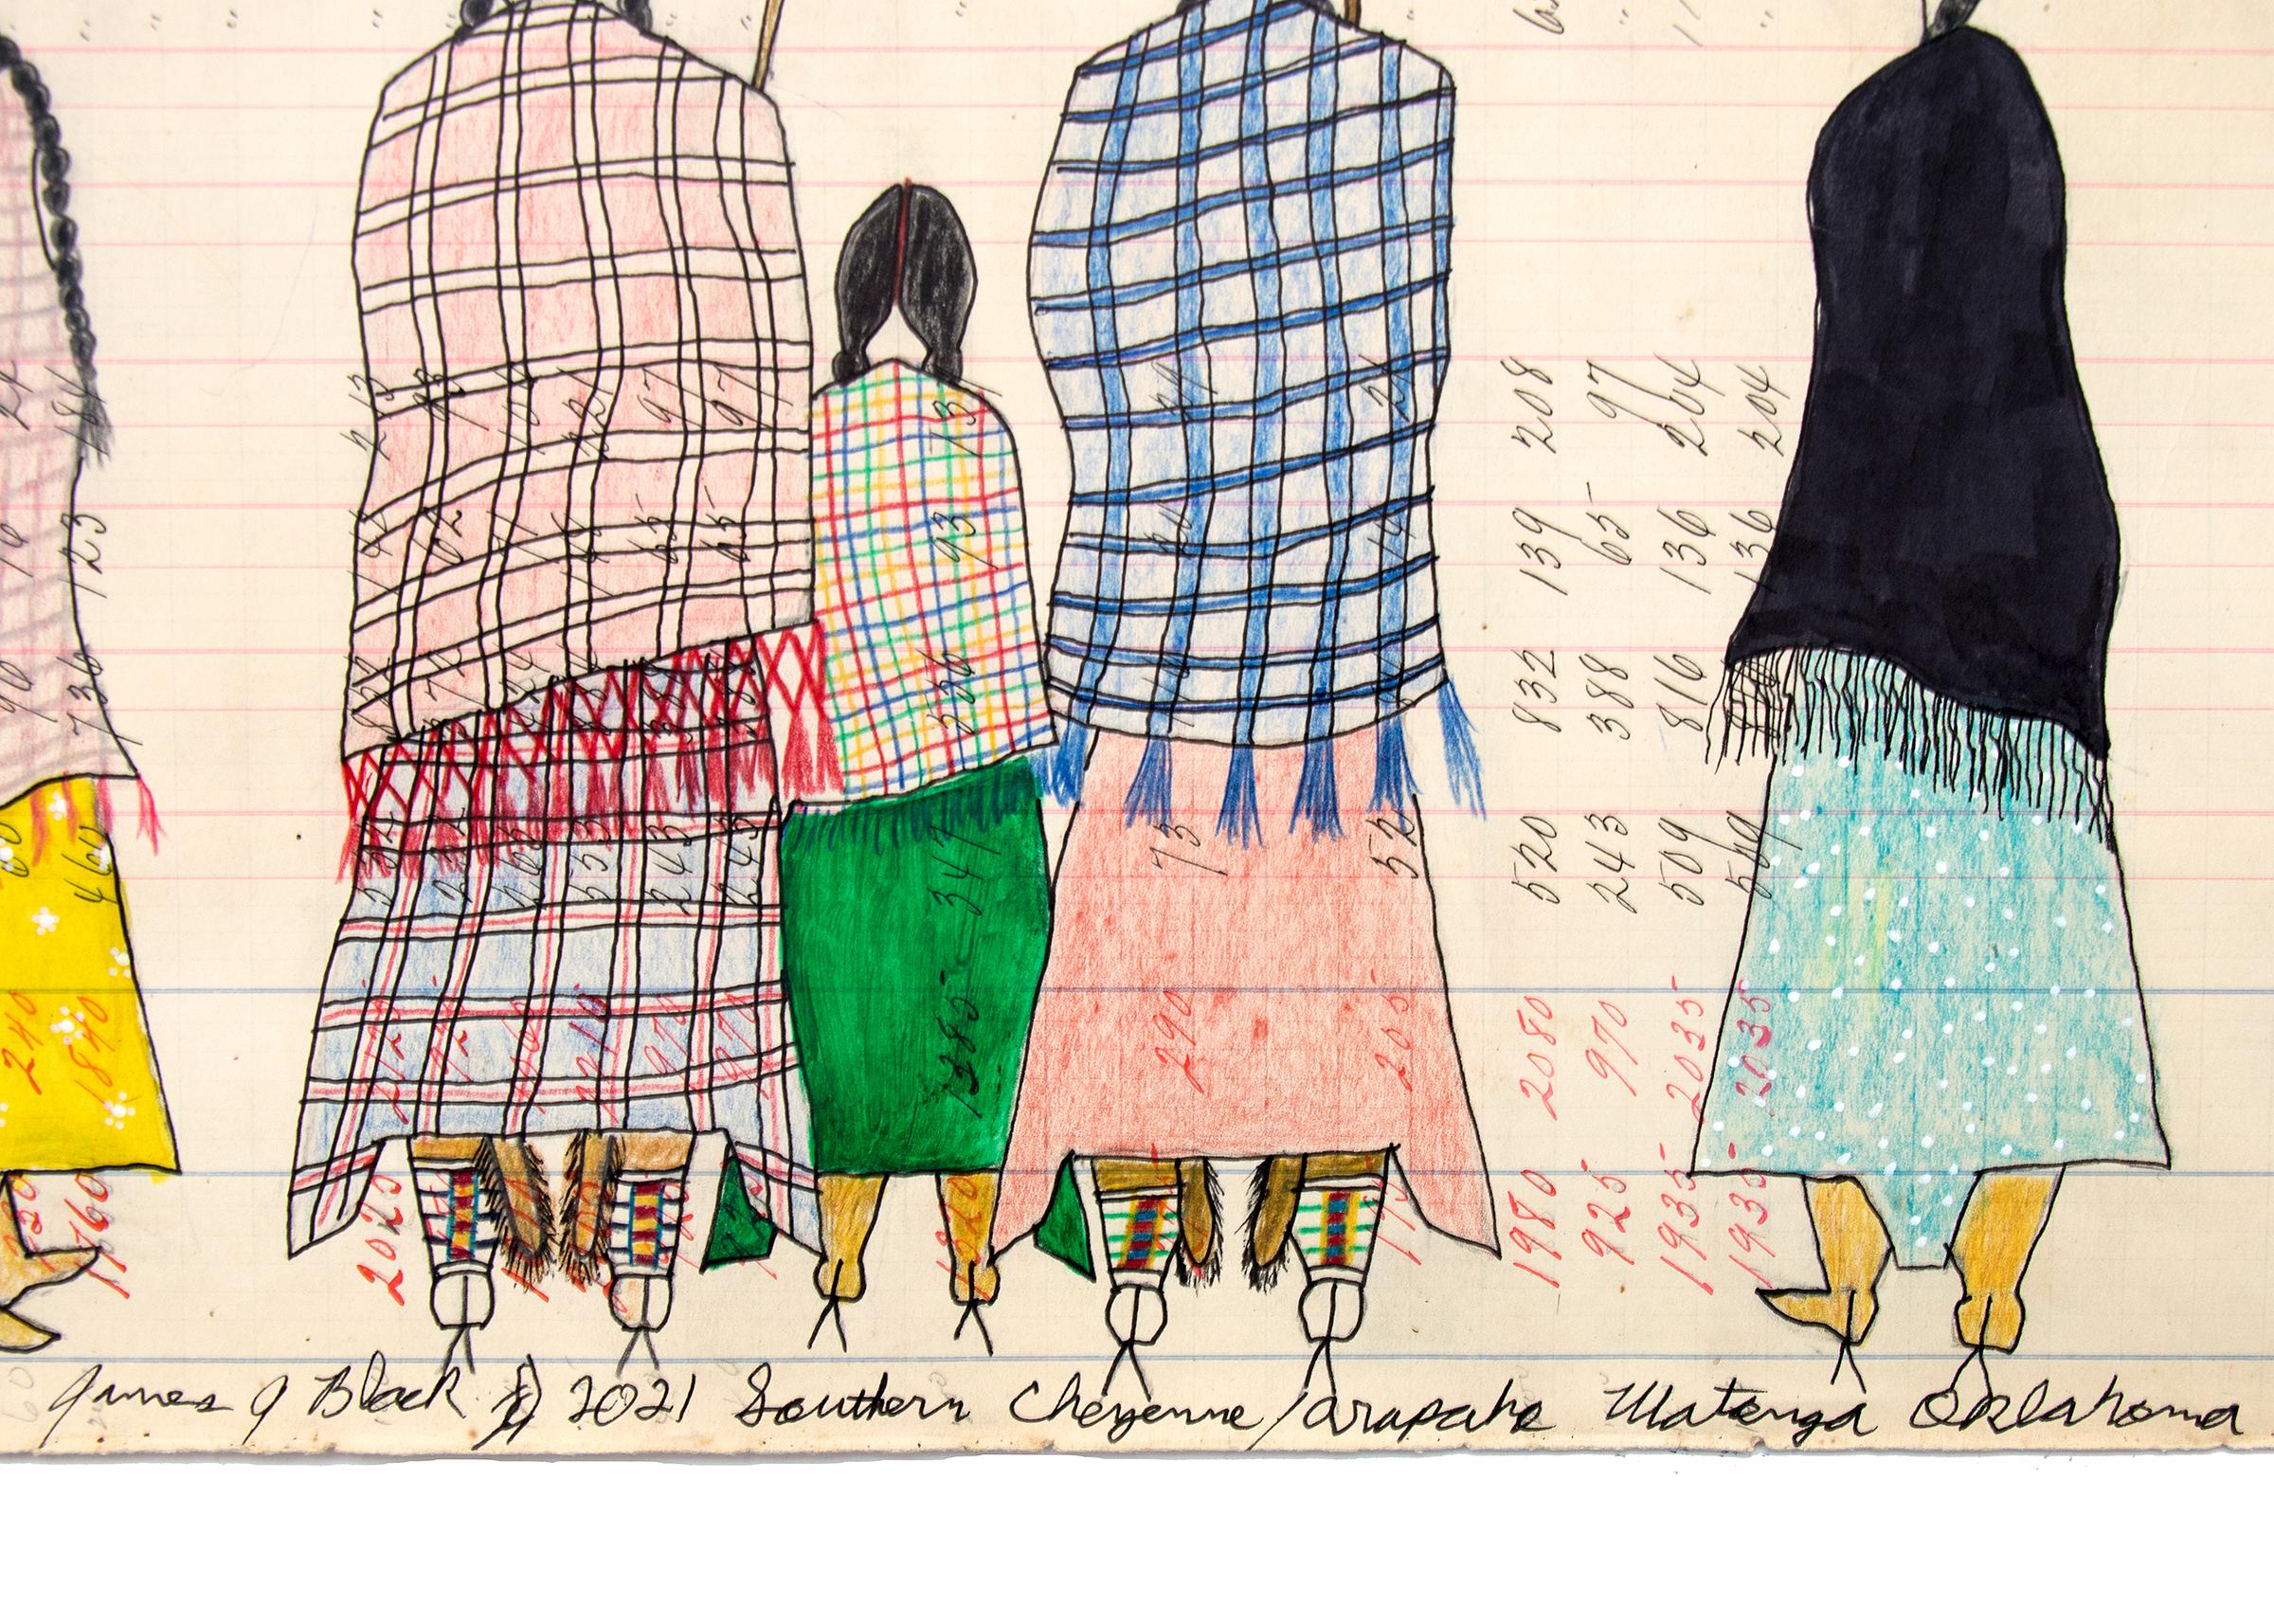 Three Sisters of the Elk Scraper Society, female Cheyenne figures with umbrellas and baby in a cradle board by contemporary Native American artist, James Black, Cheyenne Arapahoe. Crayon and marker on antique ledger paper marked 